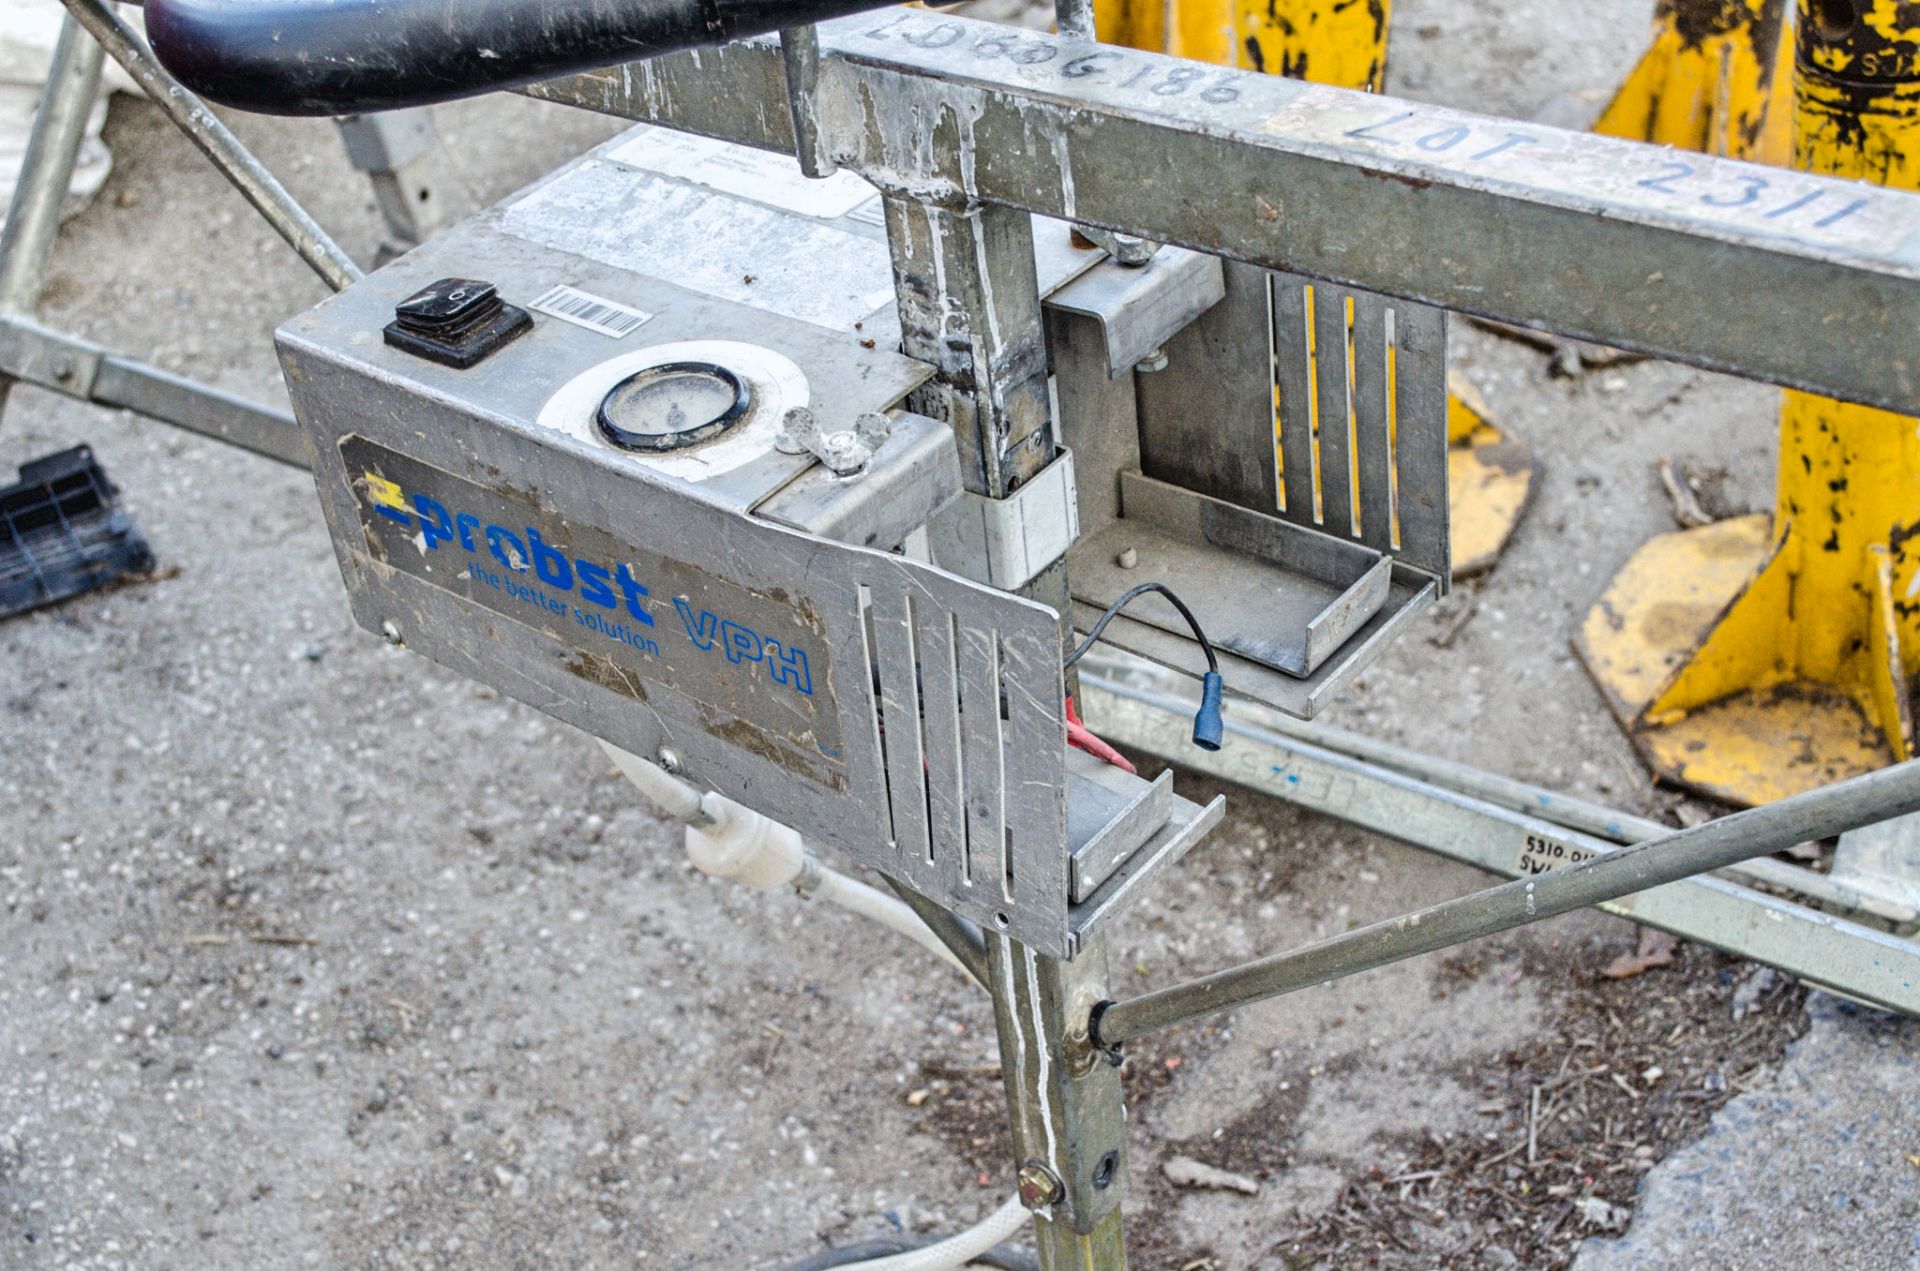 Probst VPH battery electric slab lifter - Image 2 of 2